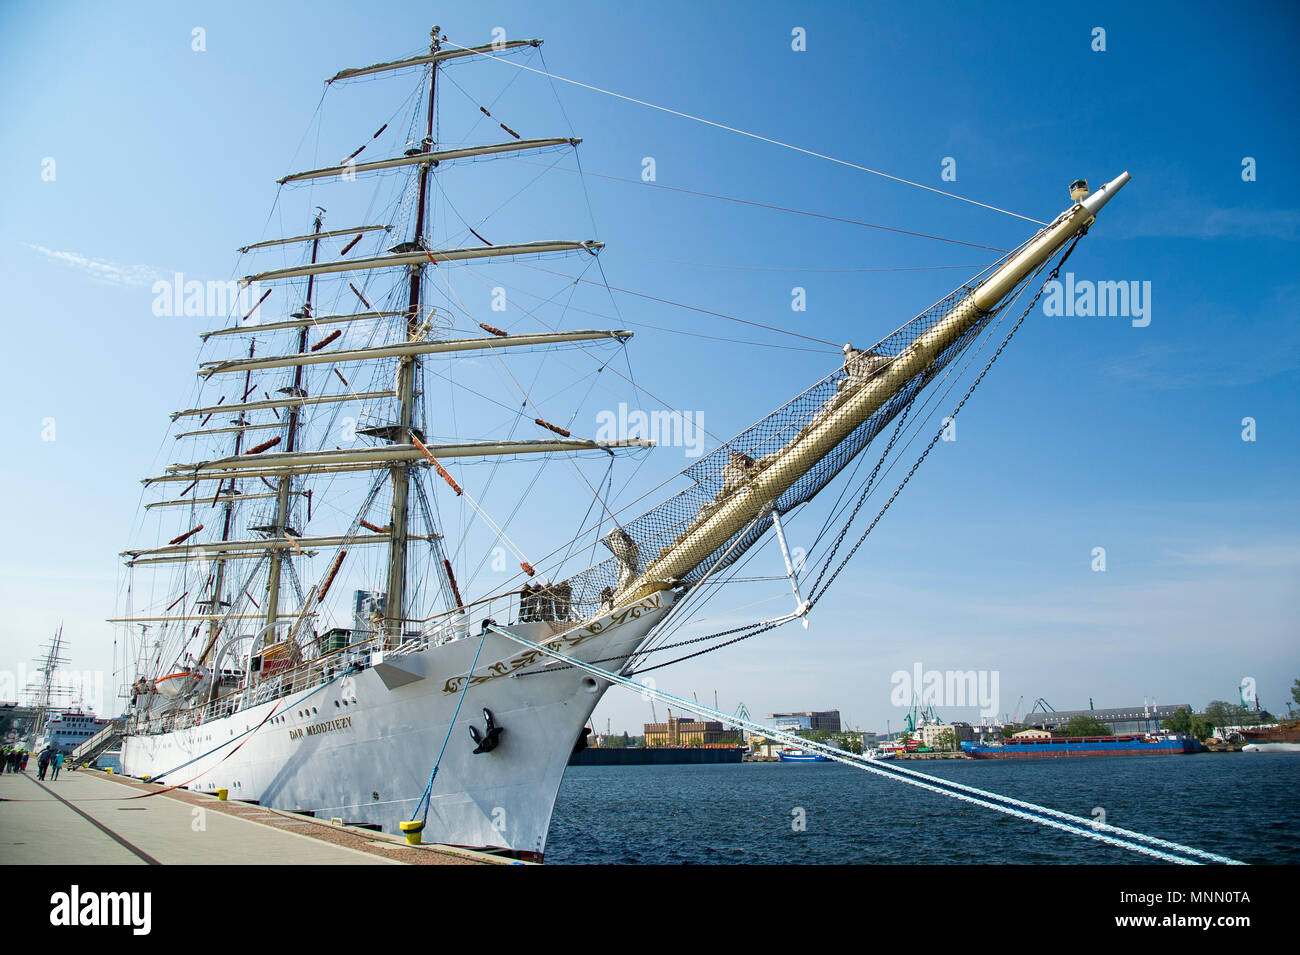 Dar Mlodziezy (Gift of the Youth), Polish full-rigged sailing ship of Gdynia Maritime University, during preparation to The Independence Sail to make  Stock Photo